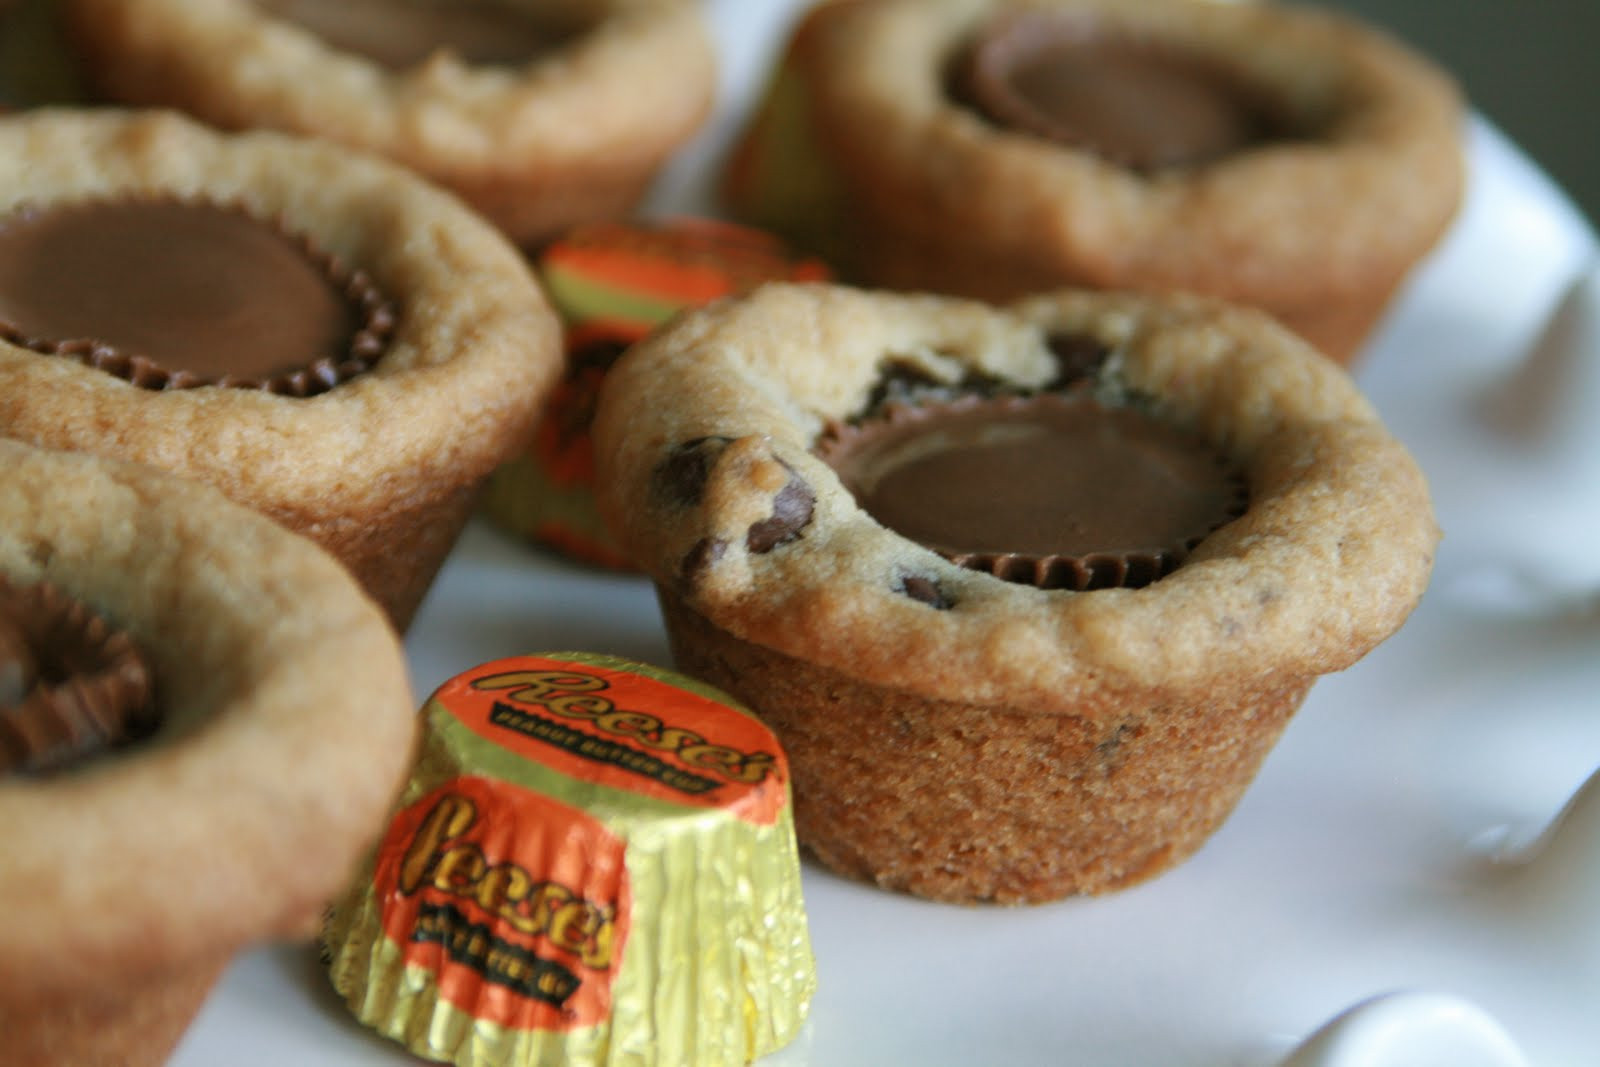 Reese Peanut Butter Cup Cookies
 Cook Bake & Decorate Mini Peanut Butter Cup Cookies